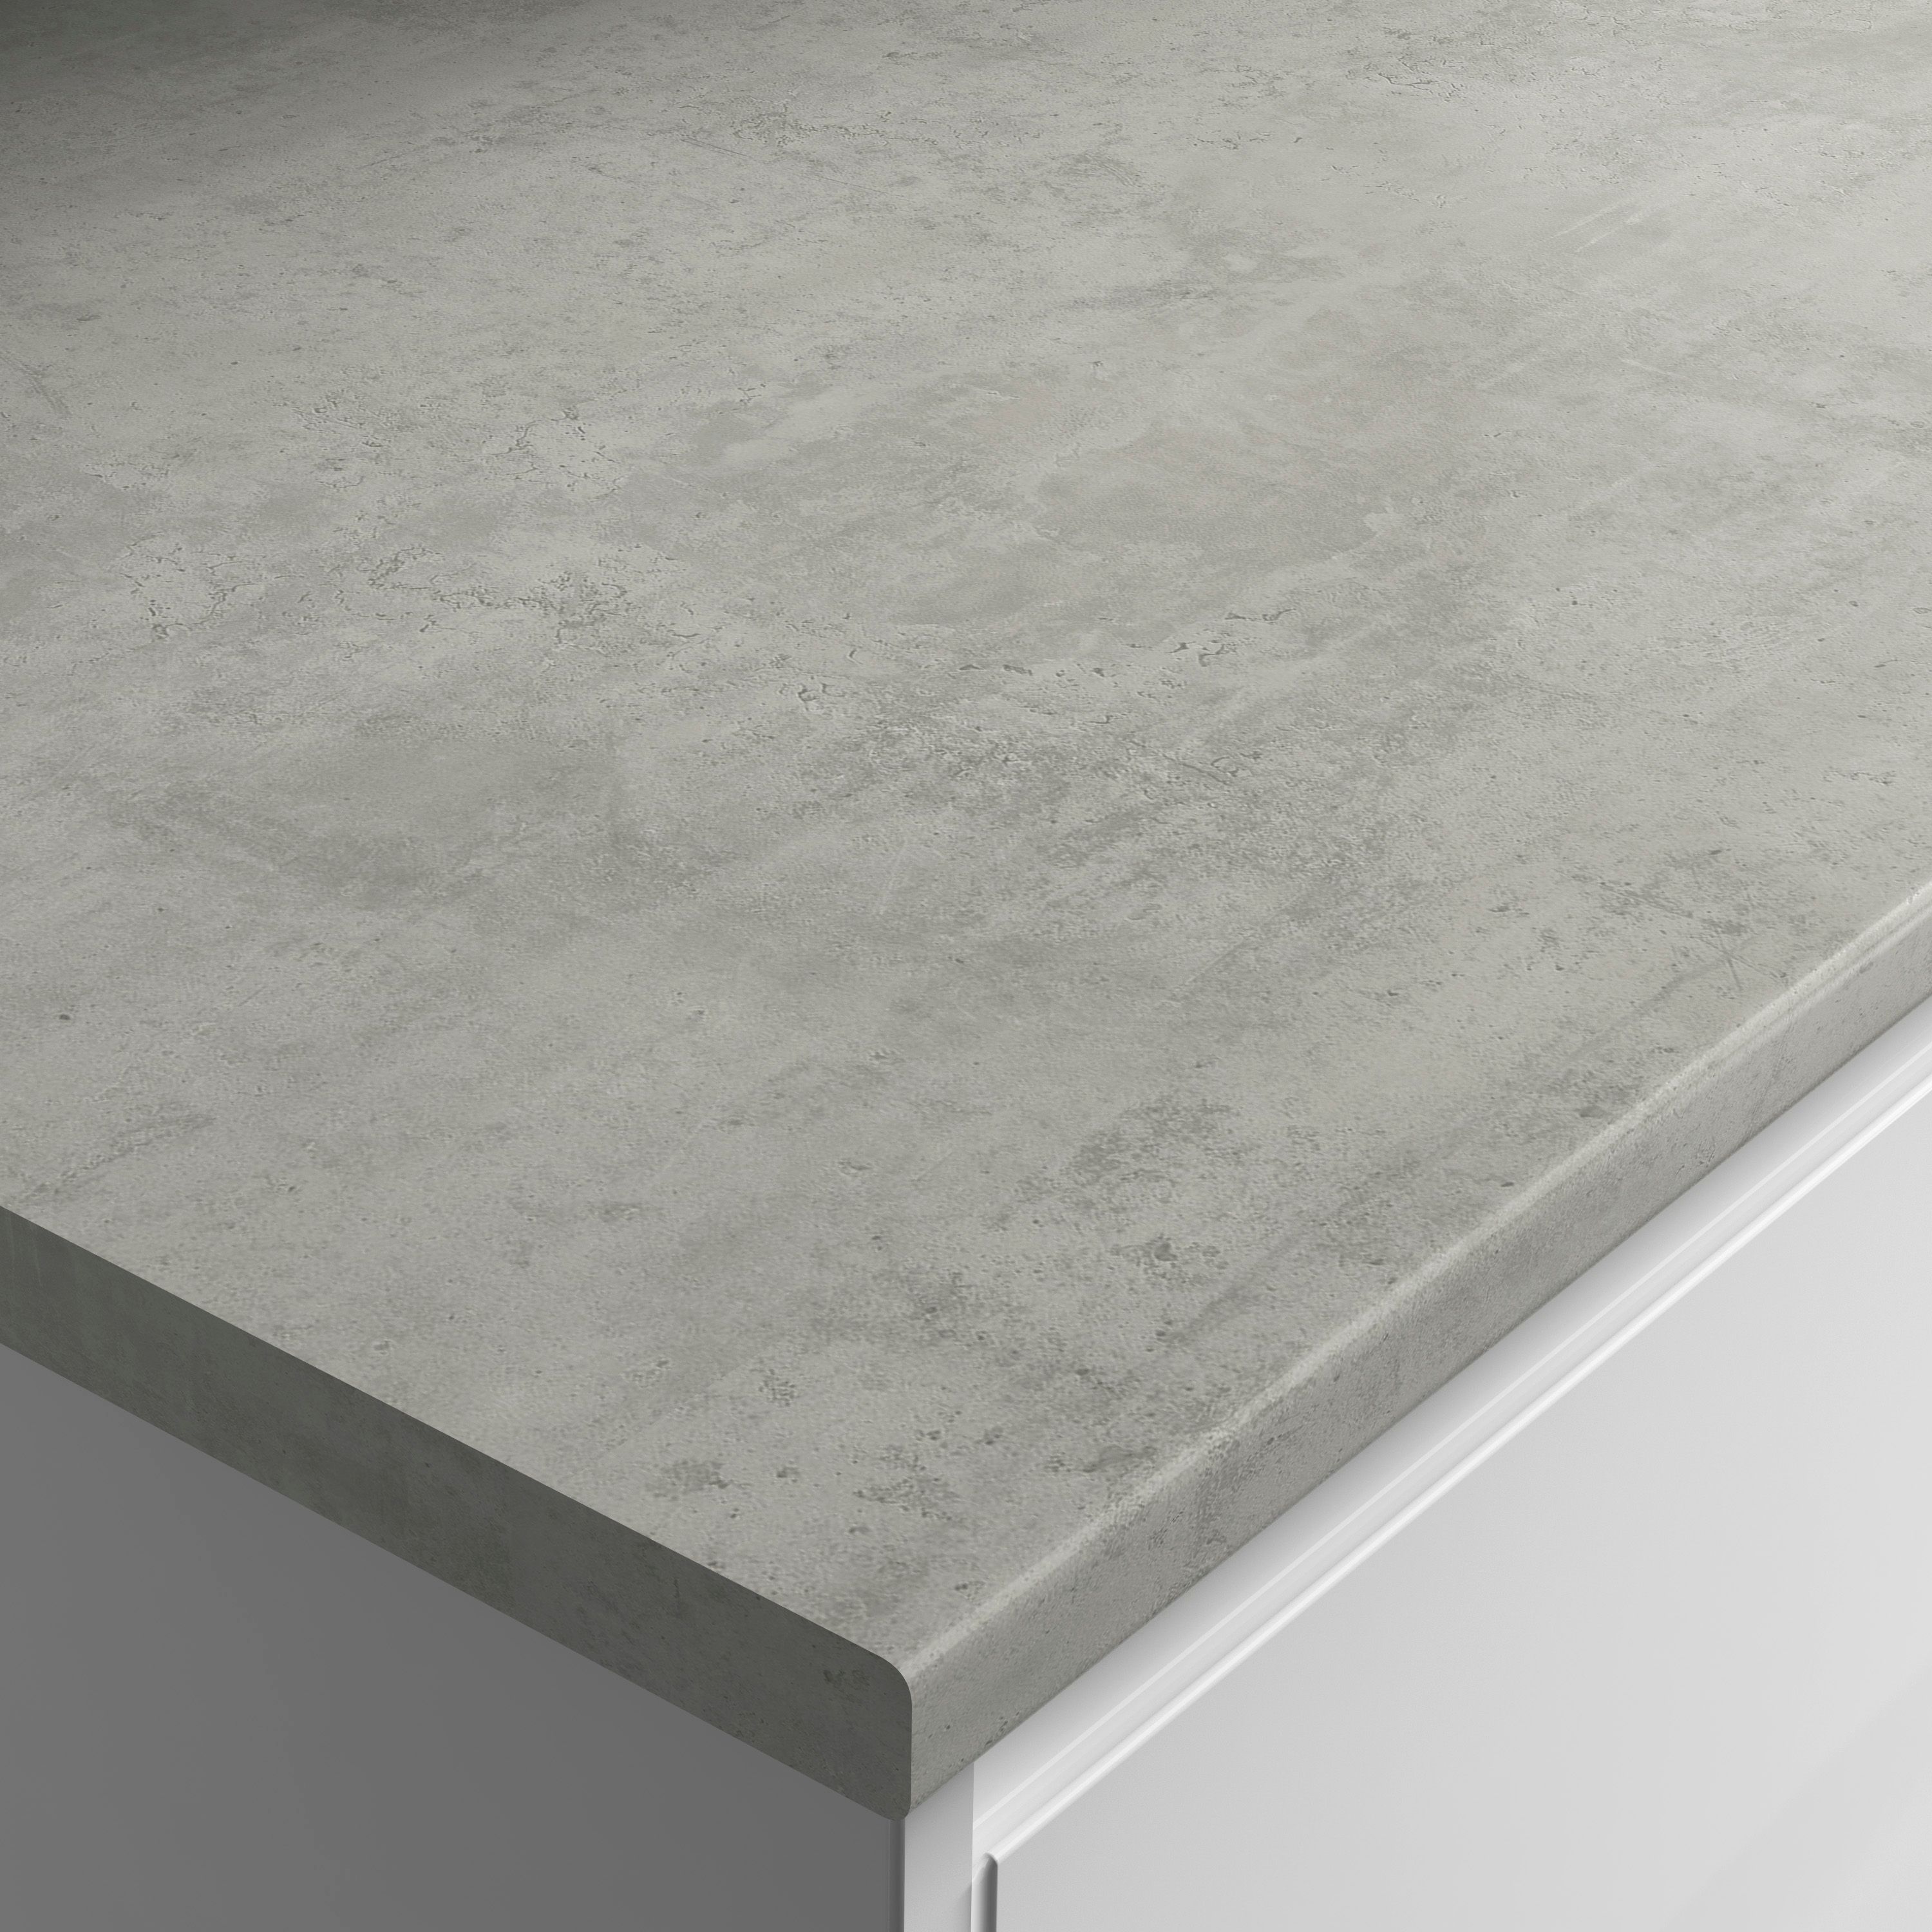 Image of Wickes Laminate Worktop Upstand - Cloudy Cement 70mm X 12mm X 3m